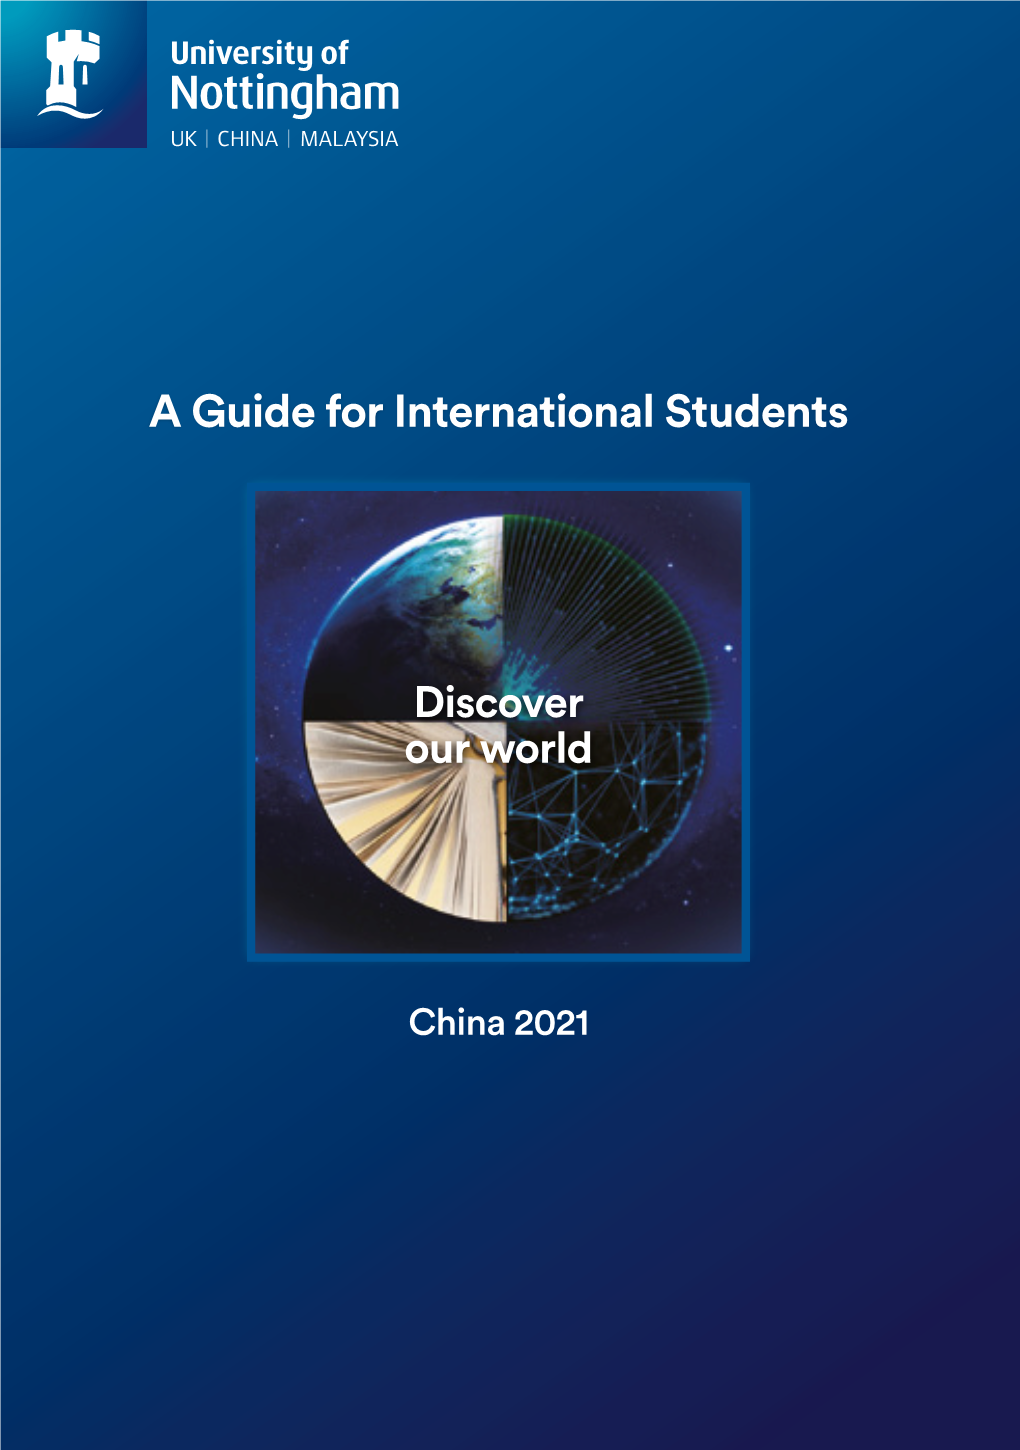 A Guide for International Students